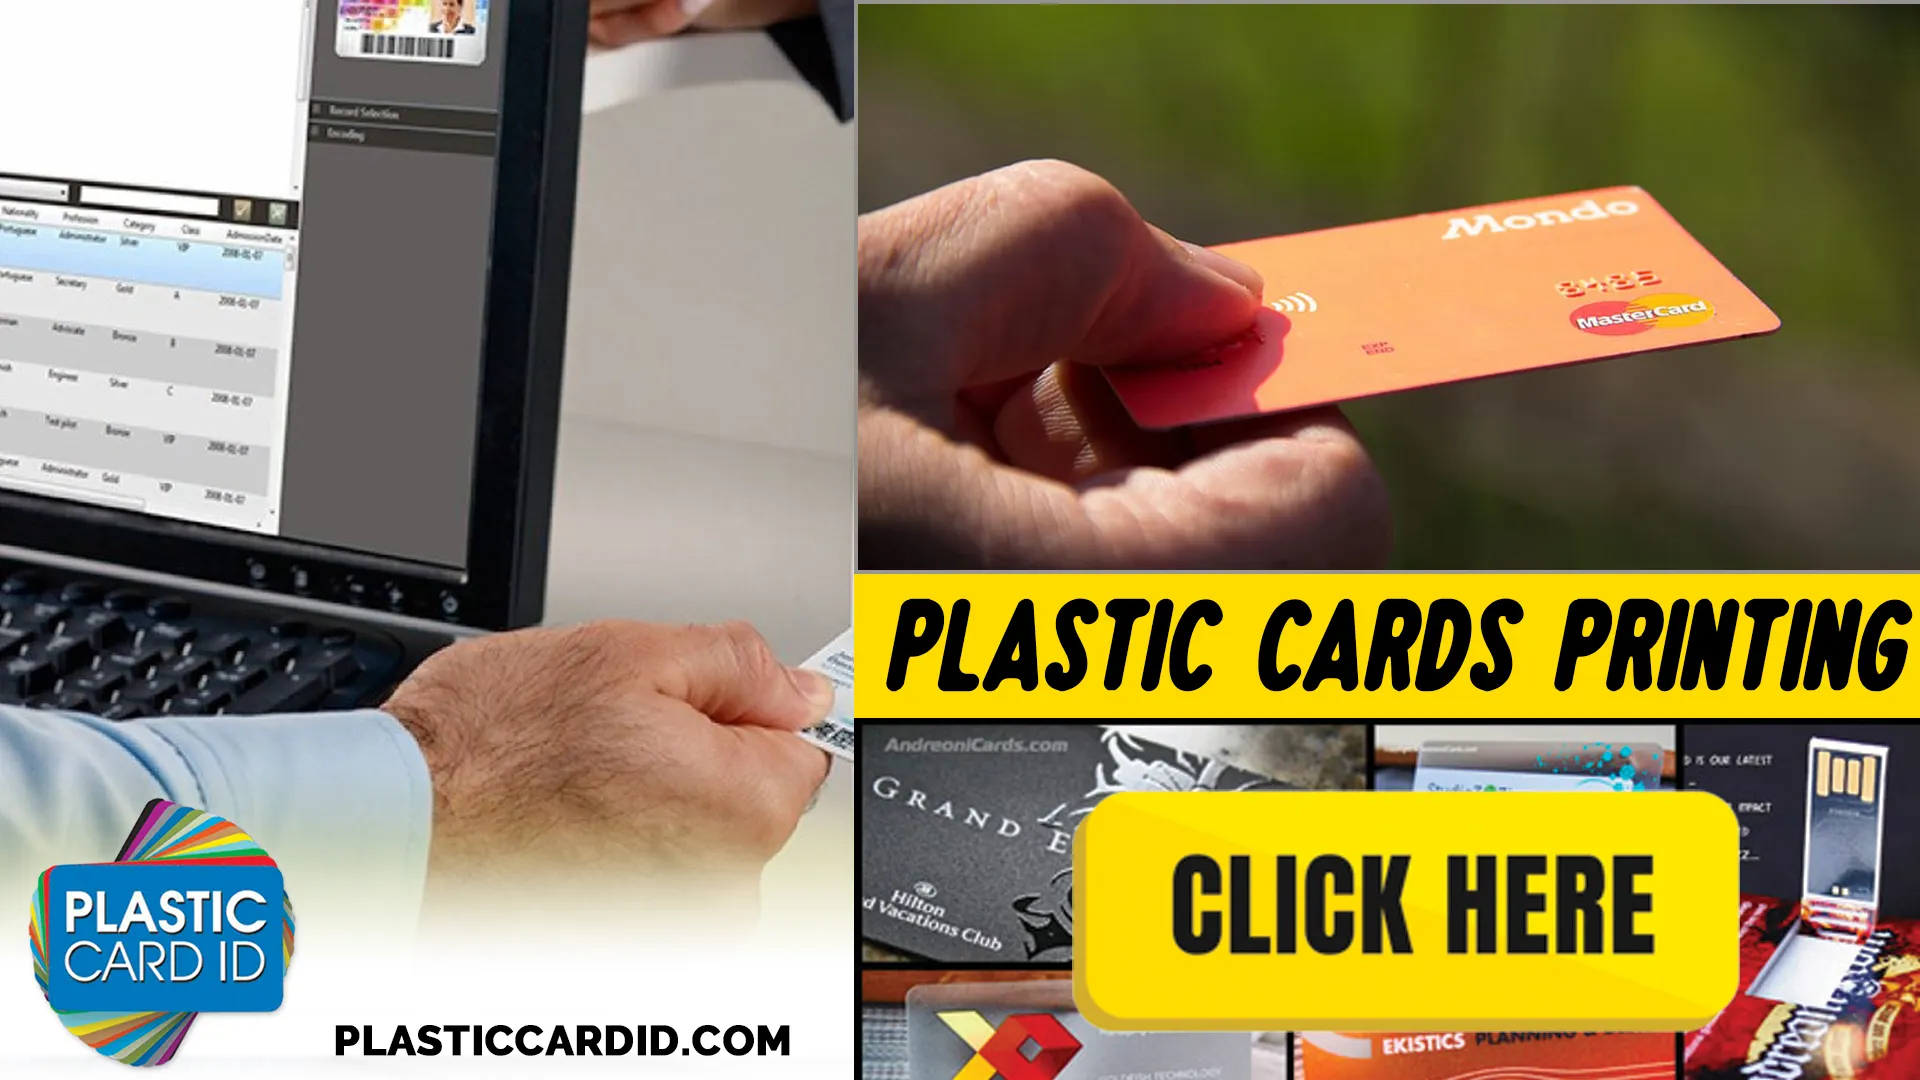 Welcome to Plastic Card ID
: Where Business Cards Make Memorable Connections